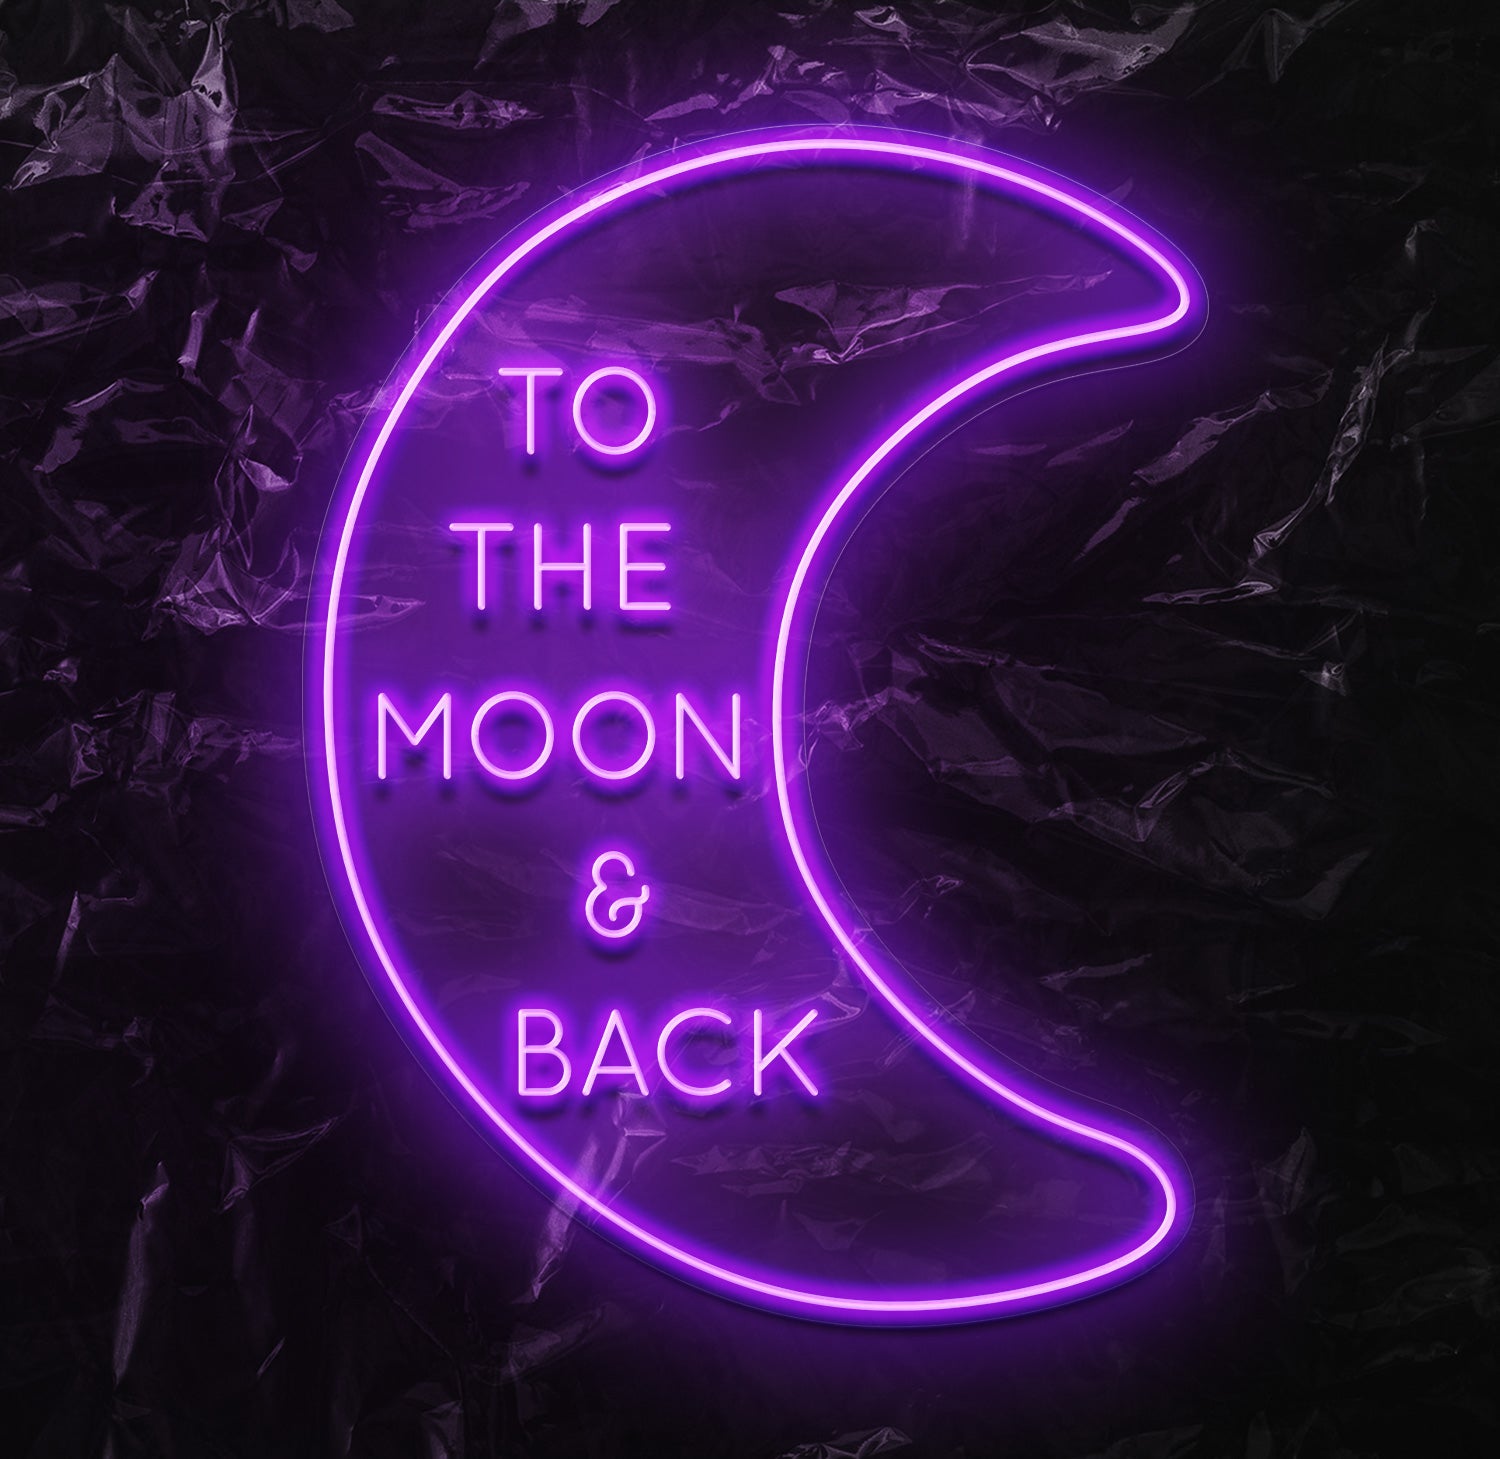 " To The Moon & Back" LED Neonschild - NEONEVERGLOW